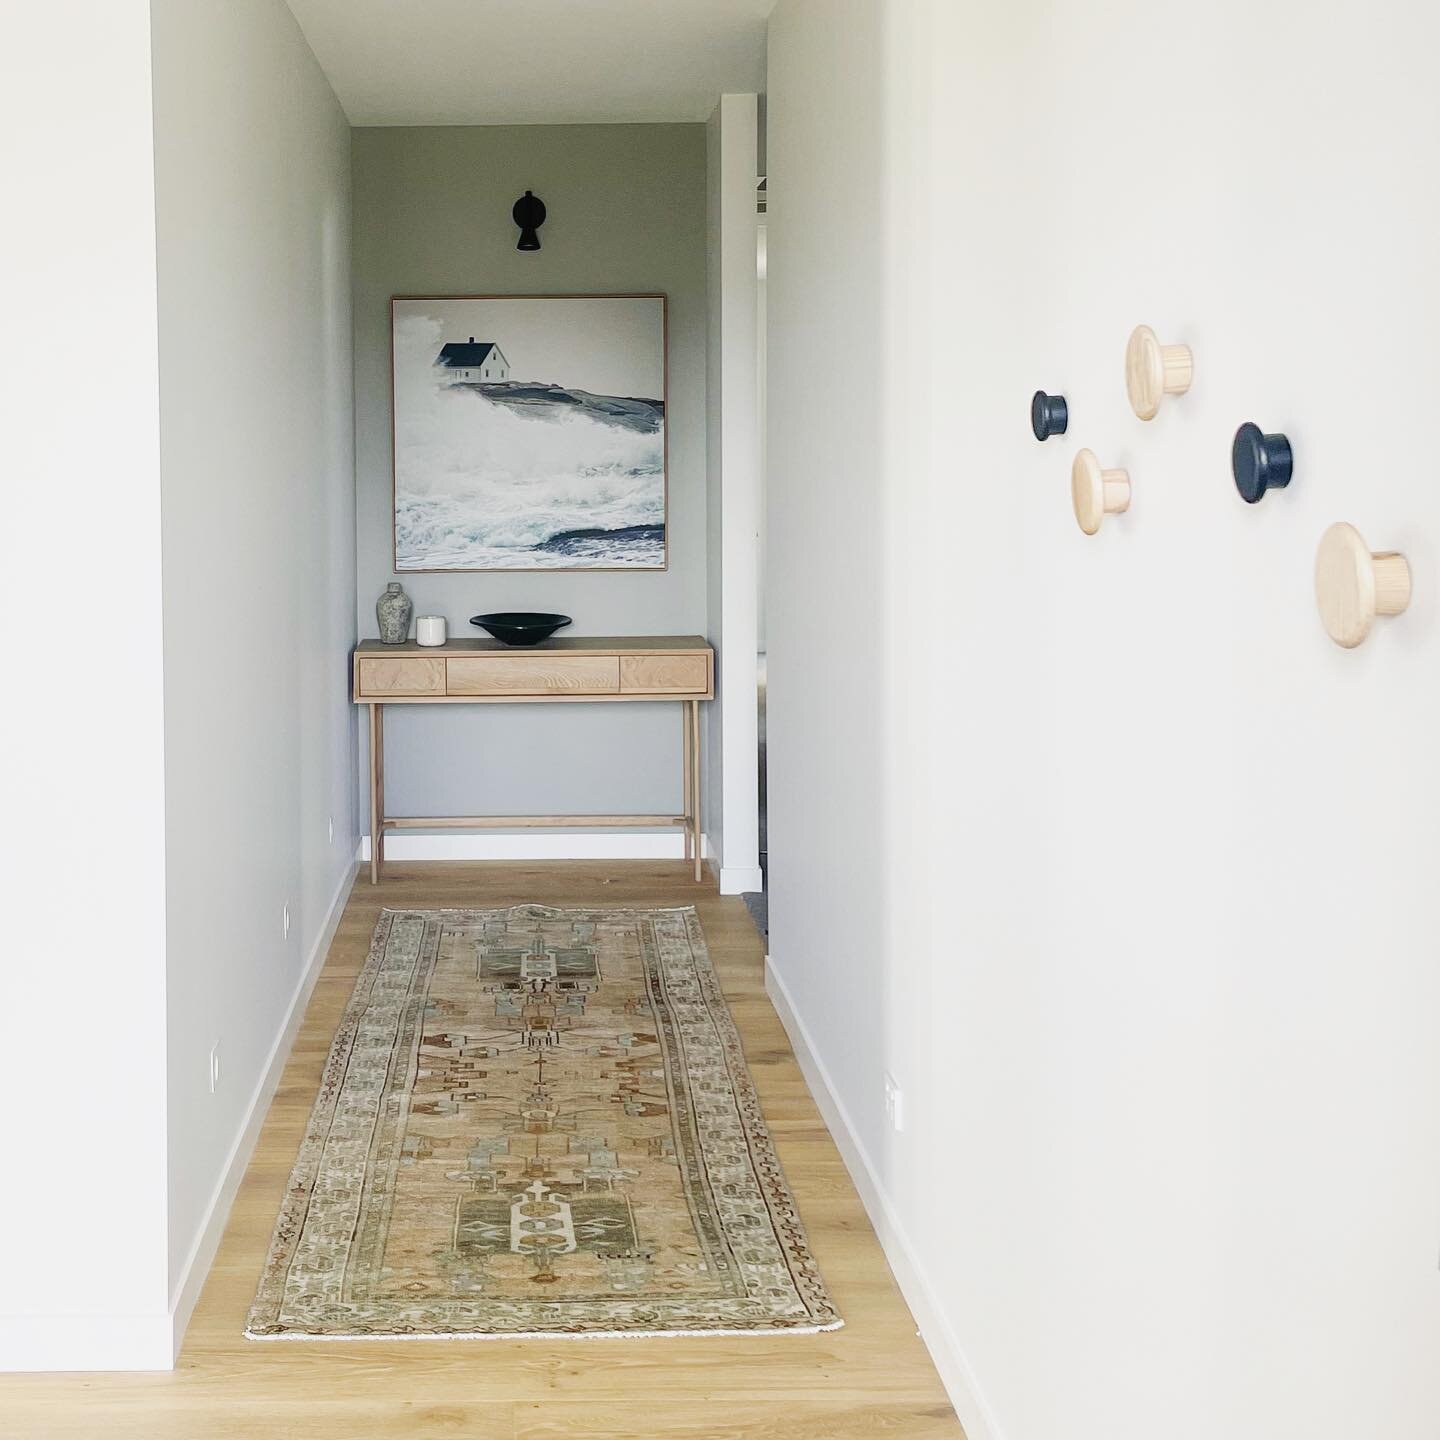 An entry is the perfect place to introduce your design direction, a sneak peak to what the rest of the home may hold ✨
.
.
.
.
.
#interiordesign #interiordesigner #nzinteriors #nzinteriordesign #interiors #styling #showhomestyle #showhomedesign #entr